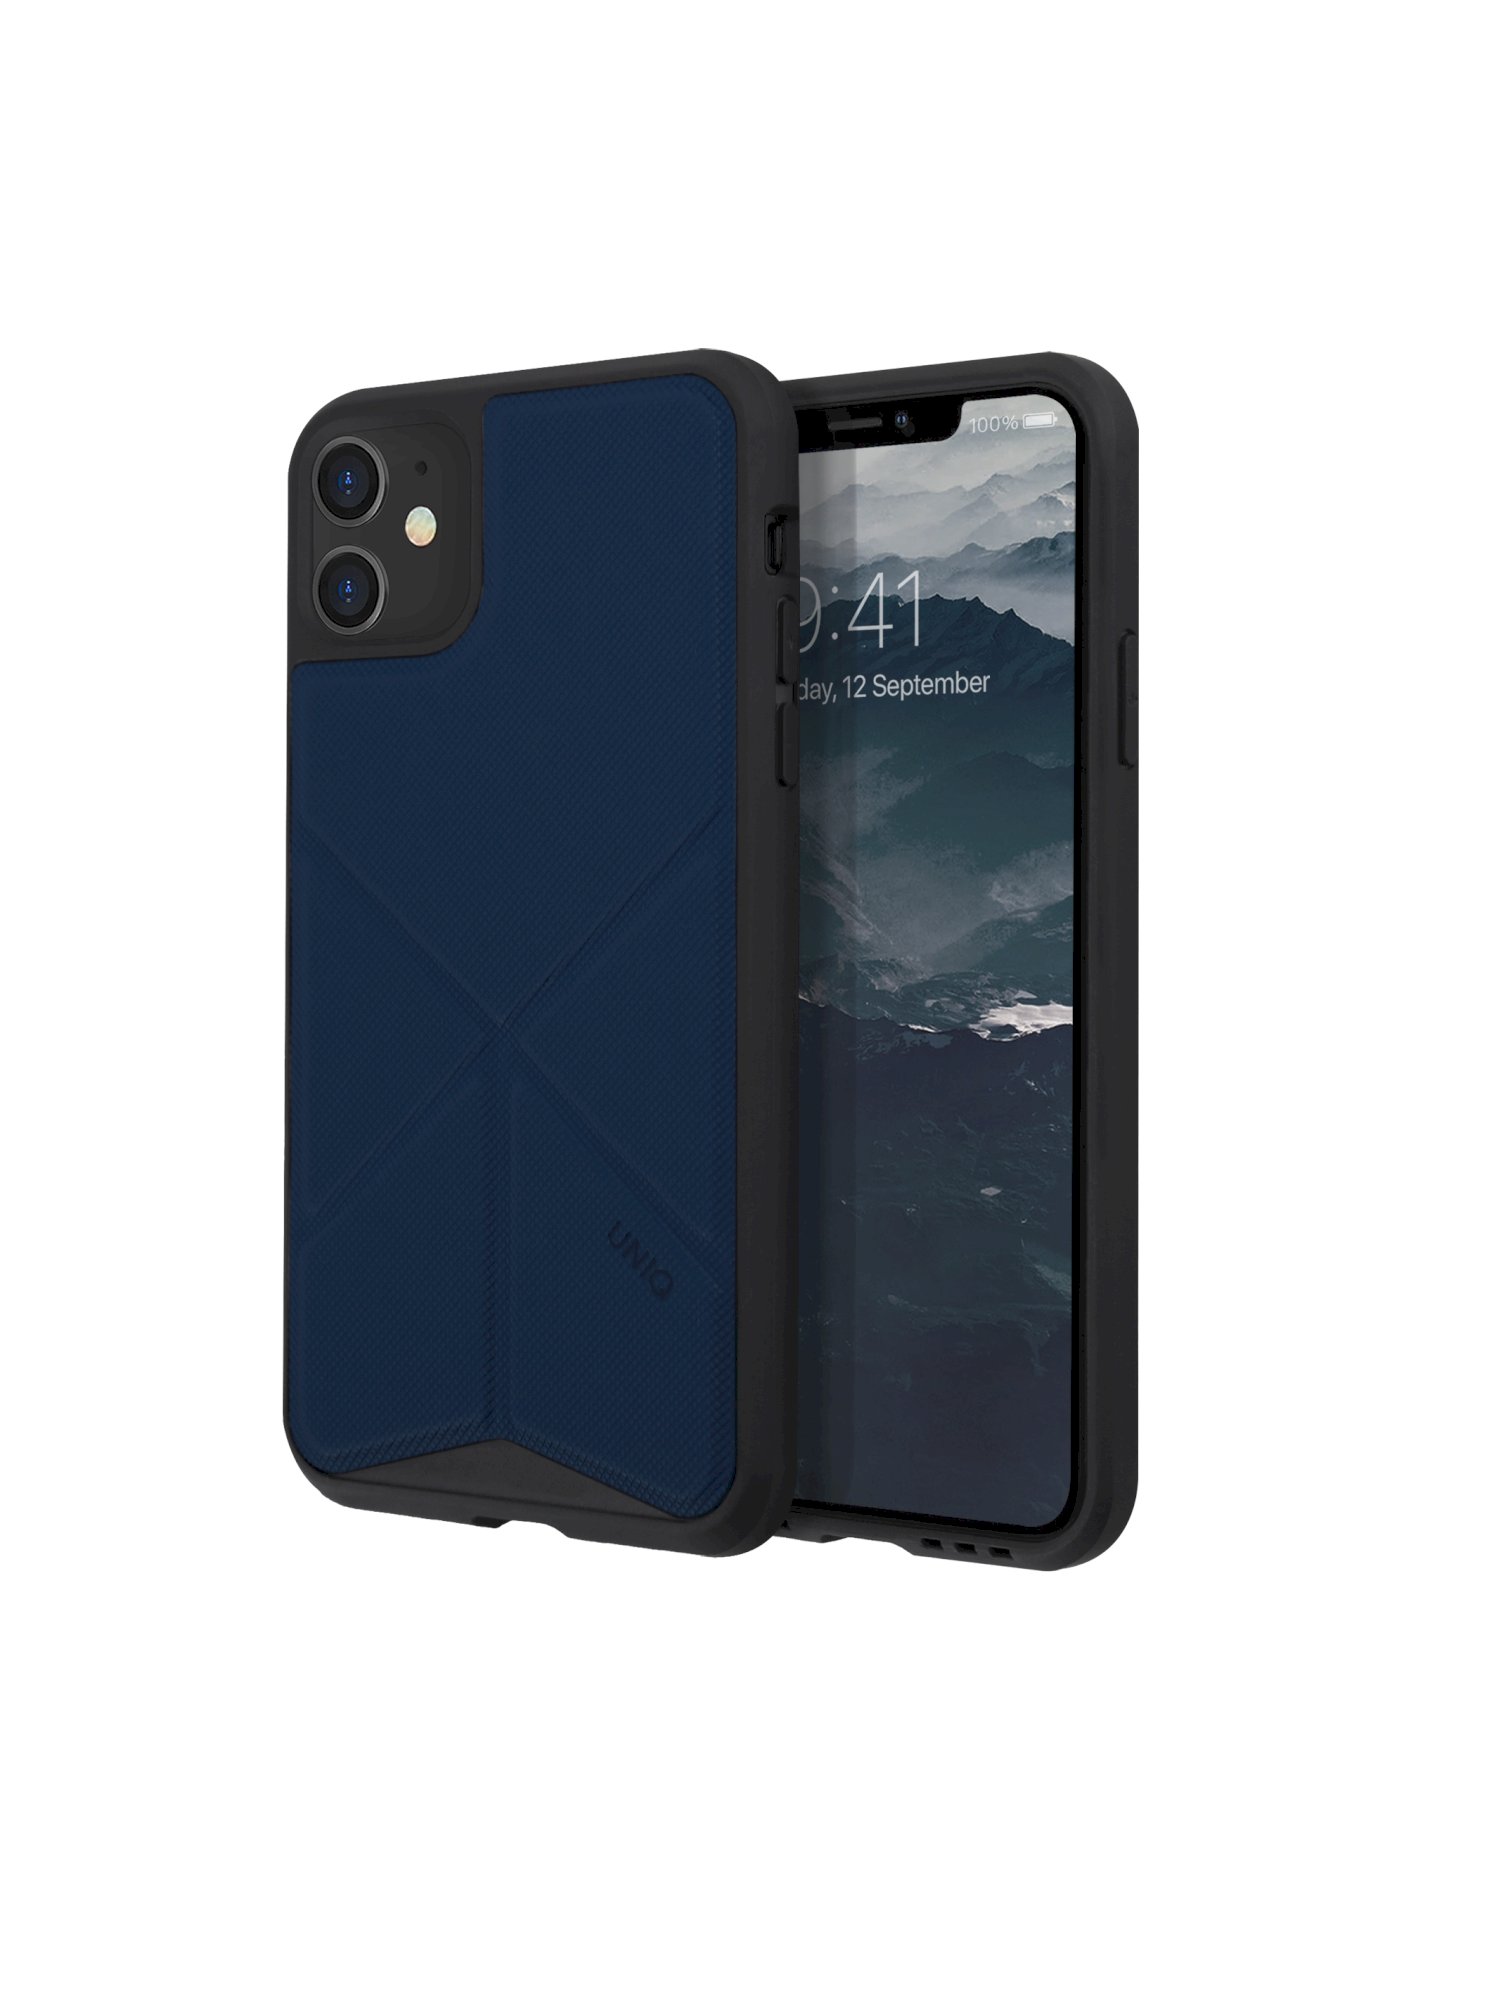 iPhone 11, hoesje transforma, stand up navy panther, blauw